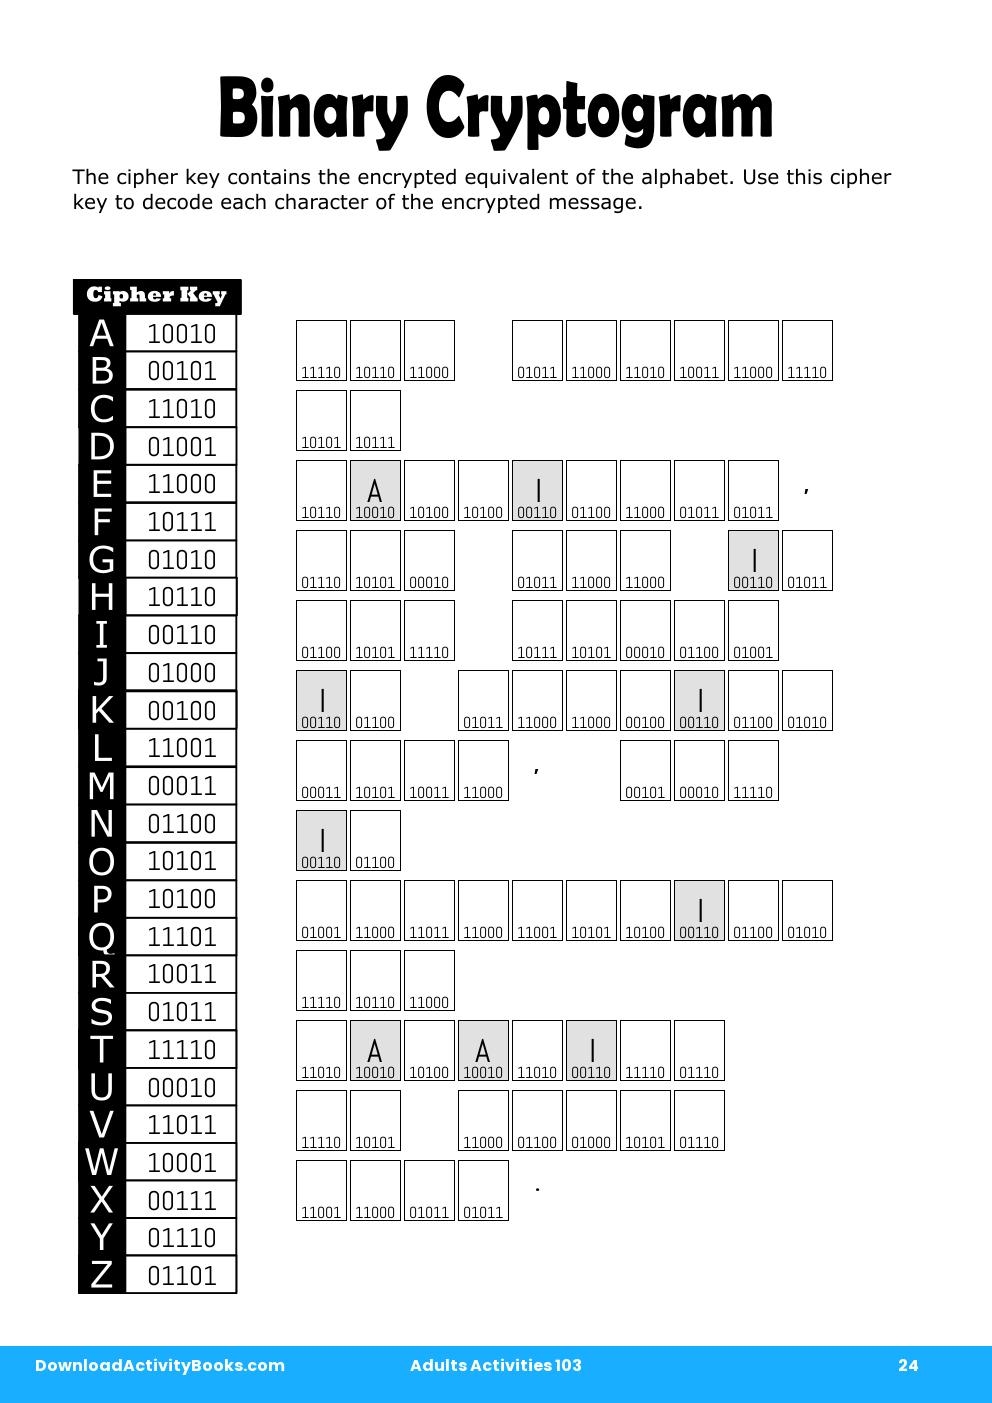 Binary Cryptogram in Adults Activities 103